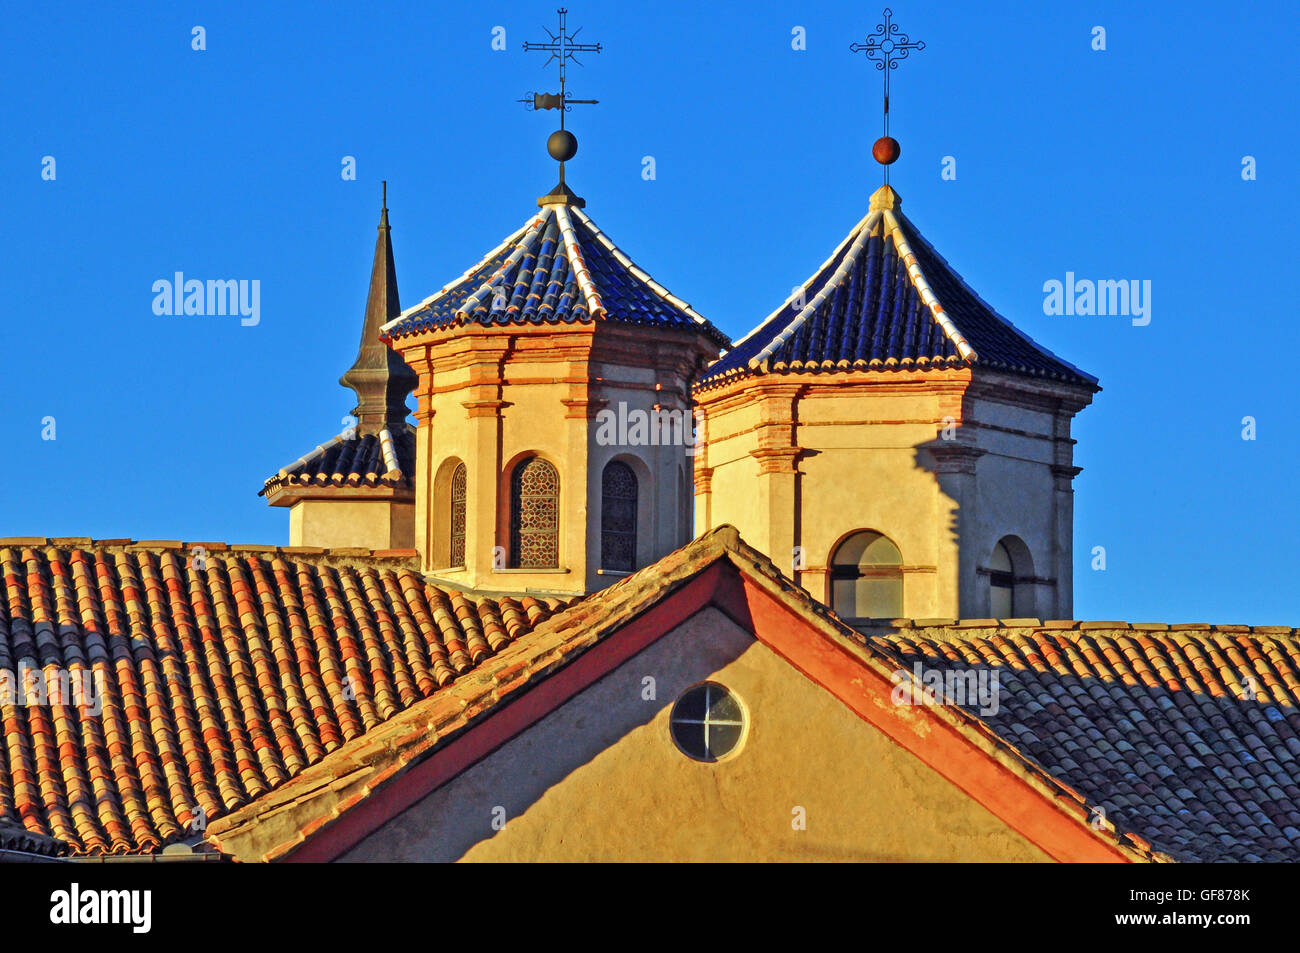 Towers in Mudejar architectural style, Cuenca, Spain Stock Photo